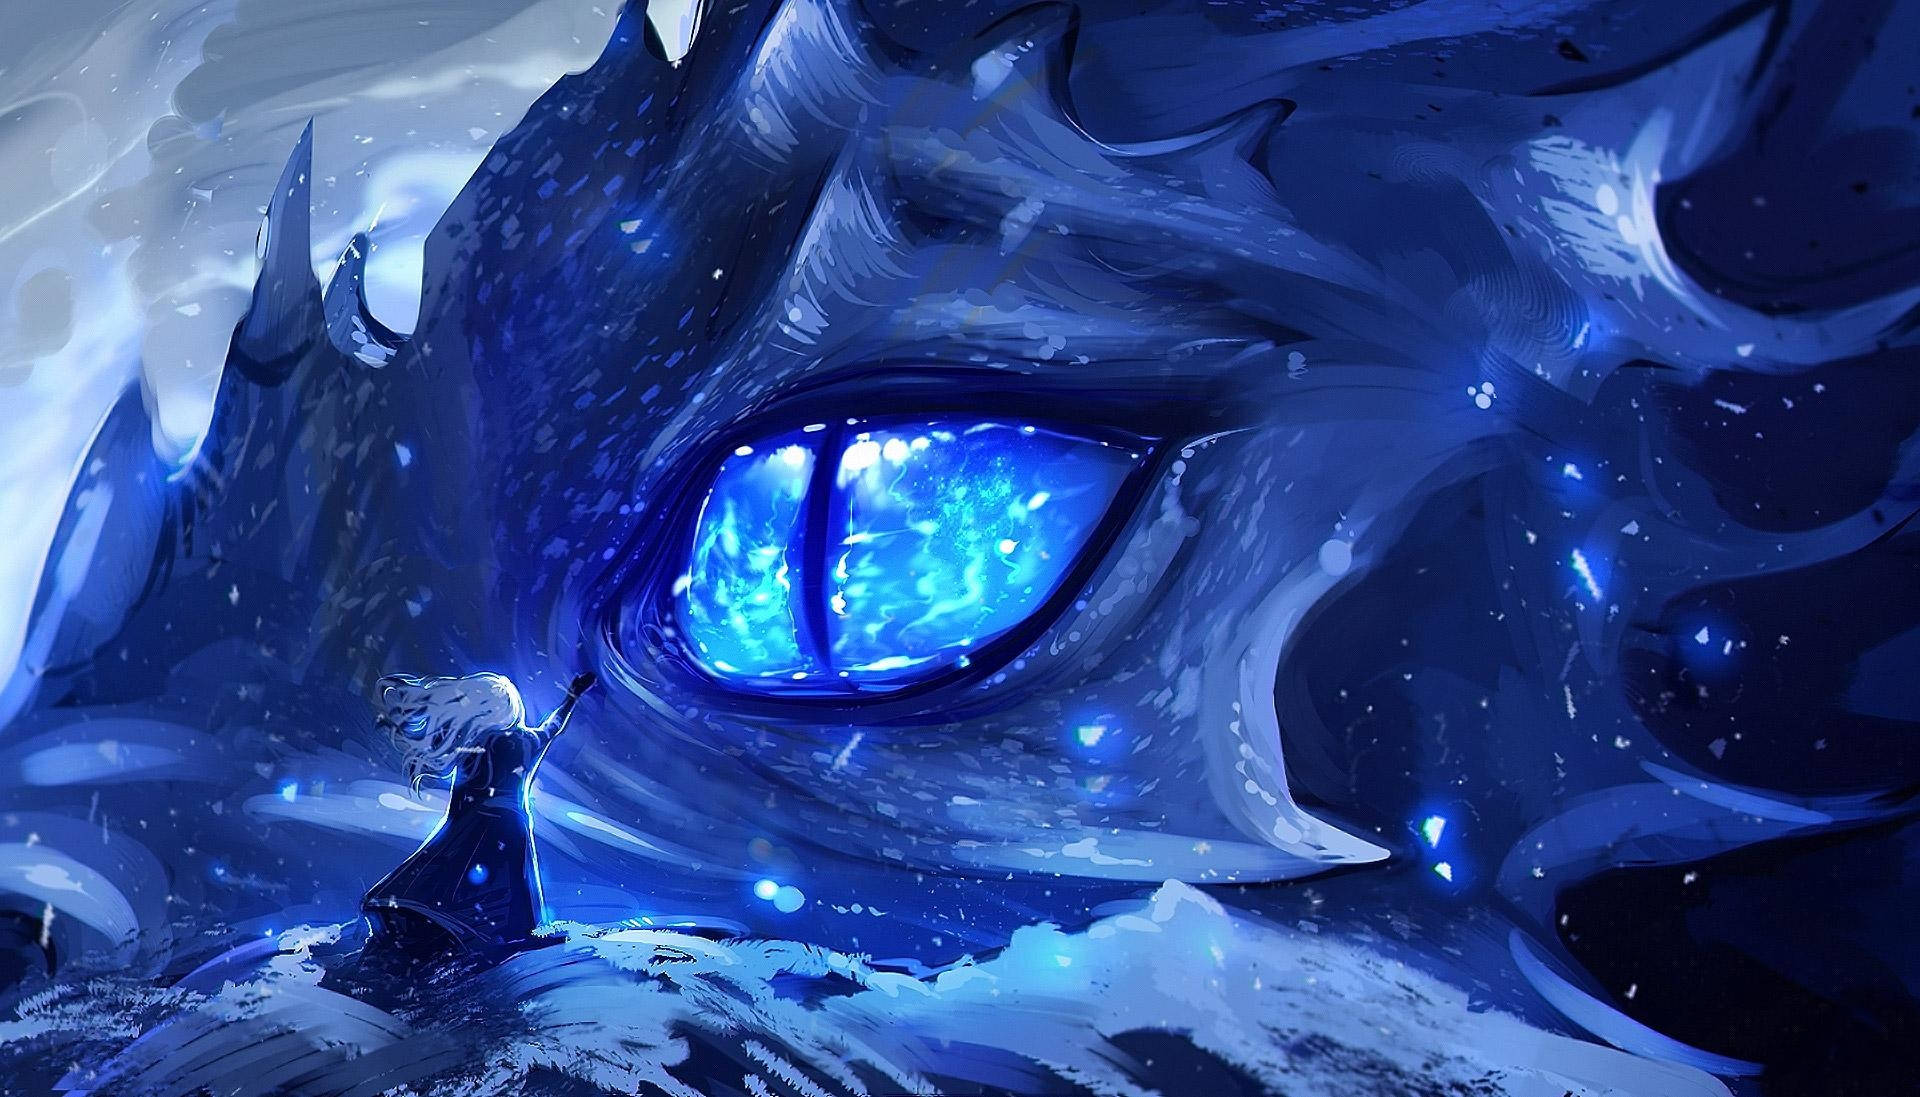 "The Galaxy Dragon, a rare and mythical creature." Wallpaper